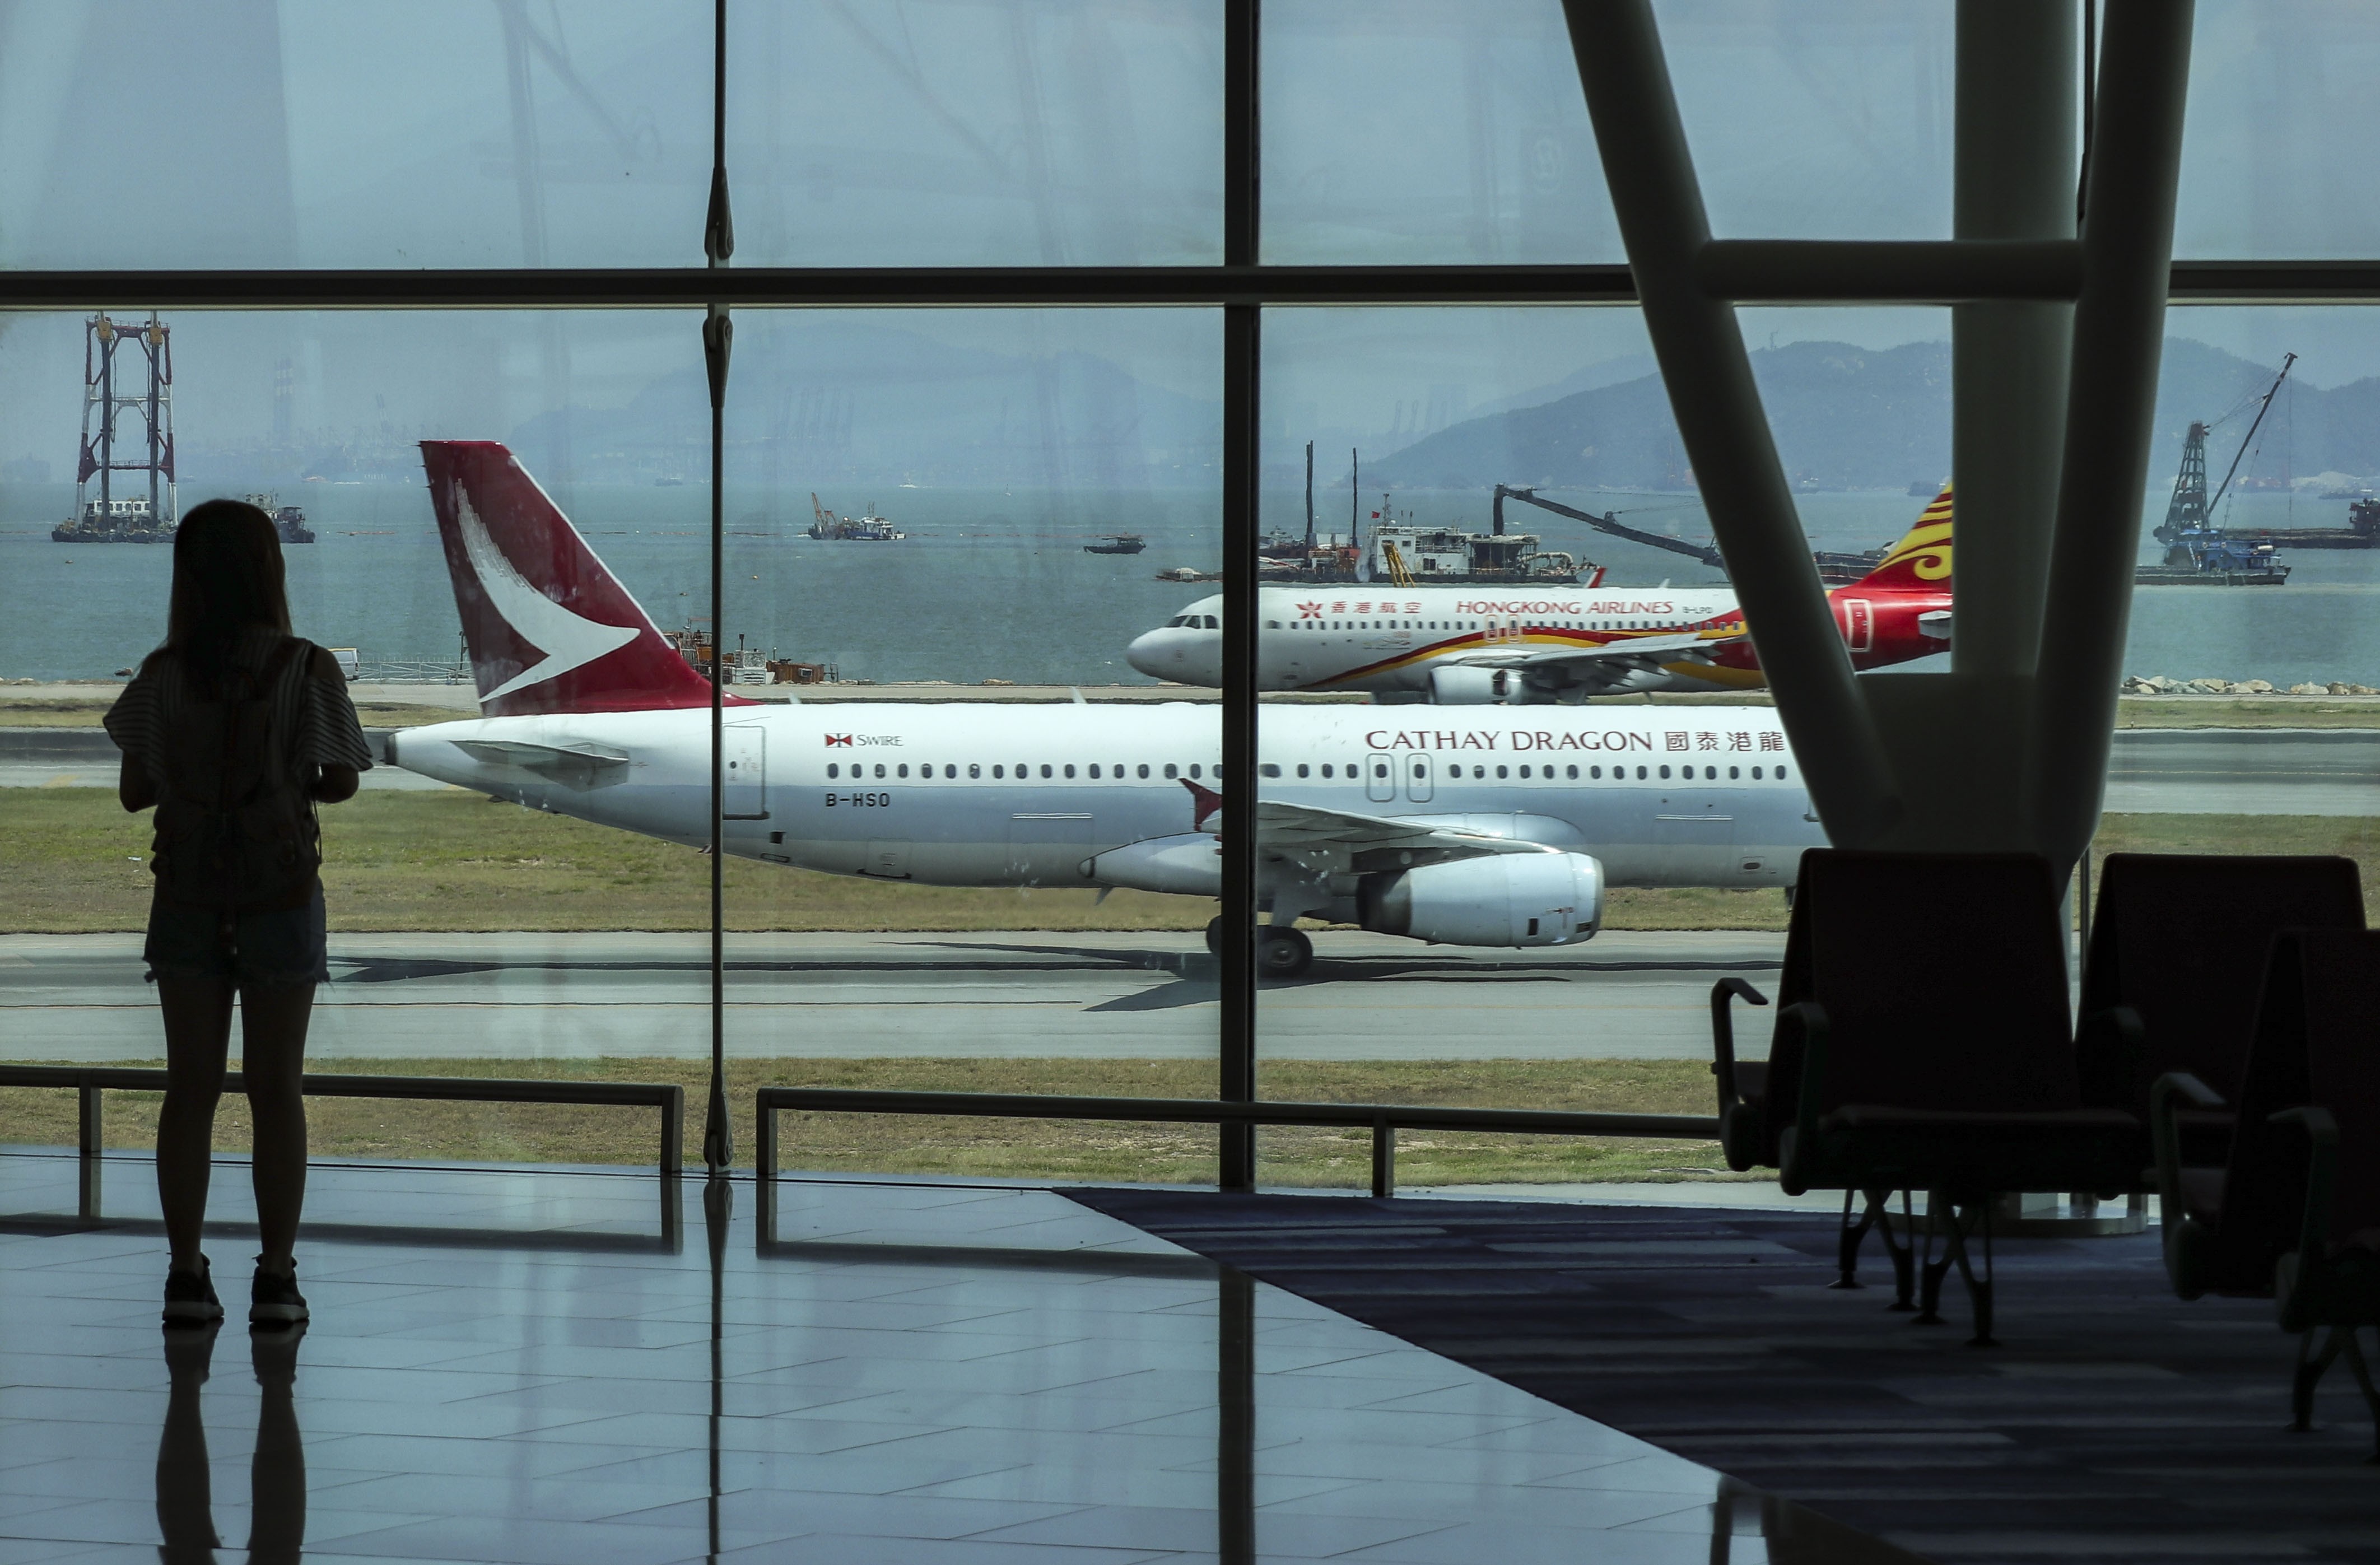 A passenger looks at aircraft at Terminal 2 of the Hong Kong International Airport in Chek Lap Kok on May 27. The city is constructing a third runway to cope with increasing air traffic, and there have been suggestions that it needs a fourth. Photo: Roy Issa